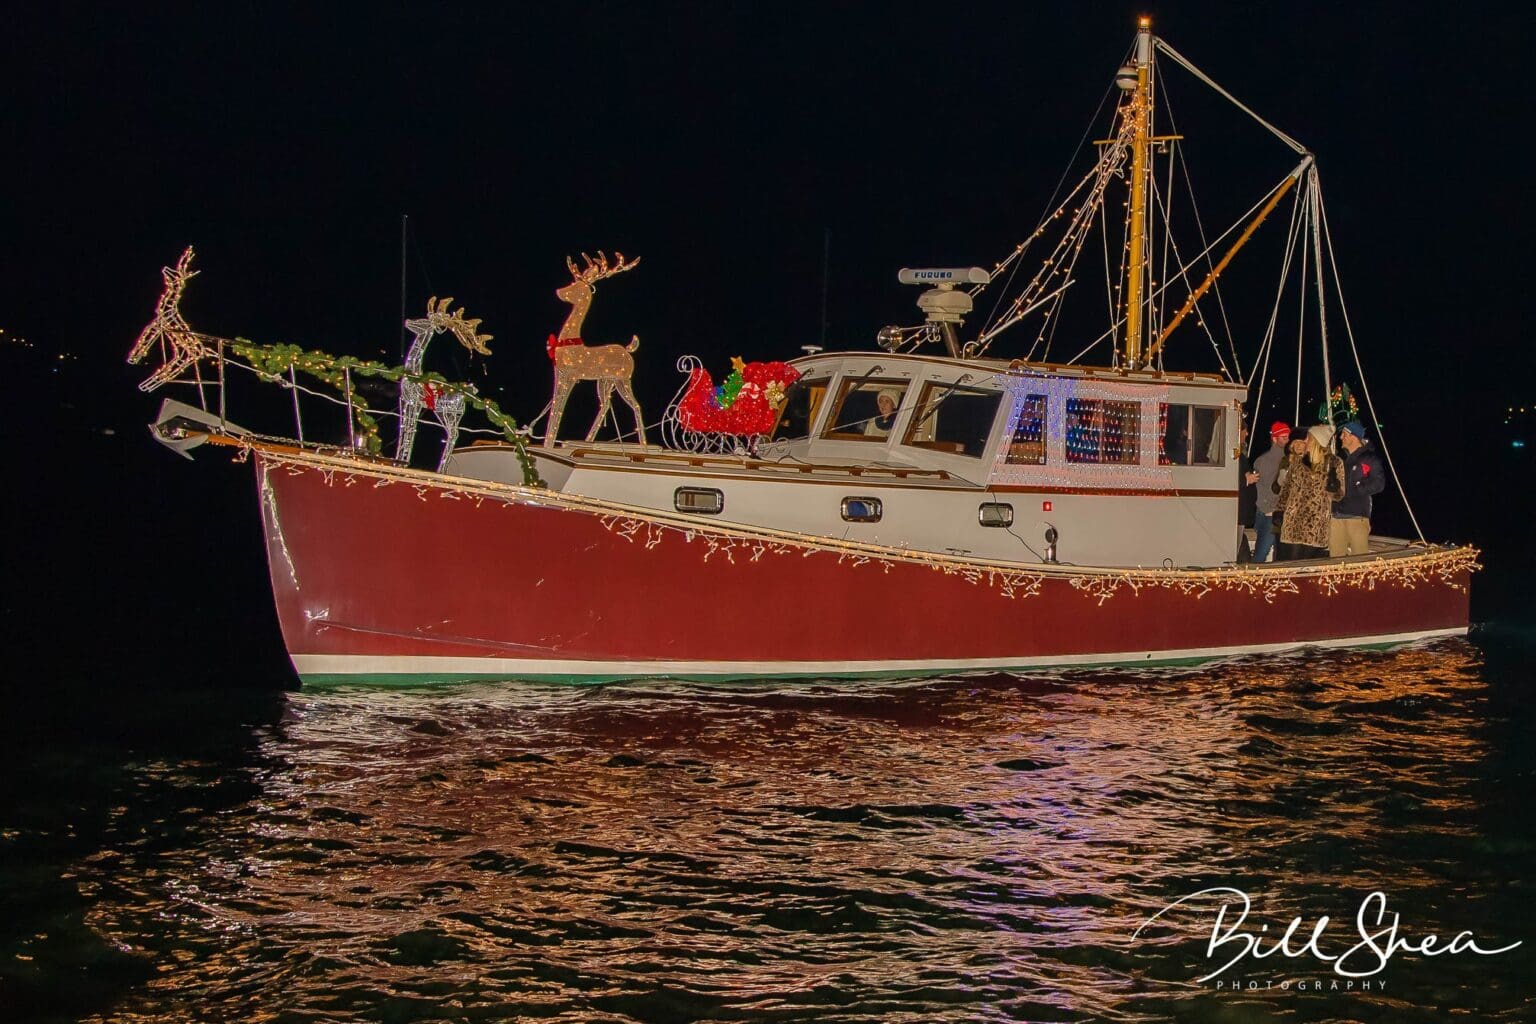 Get Your Holiday(s) on Newport Illuminated Boat Parade